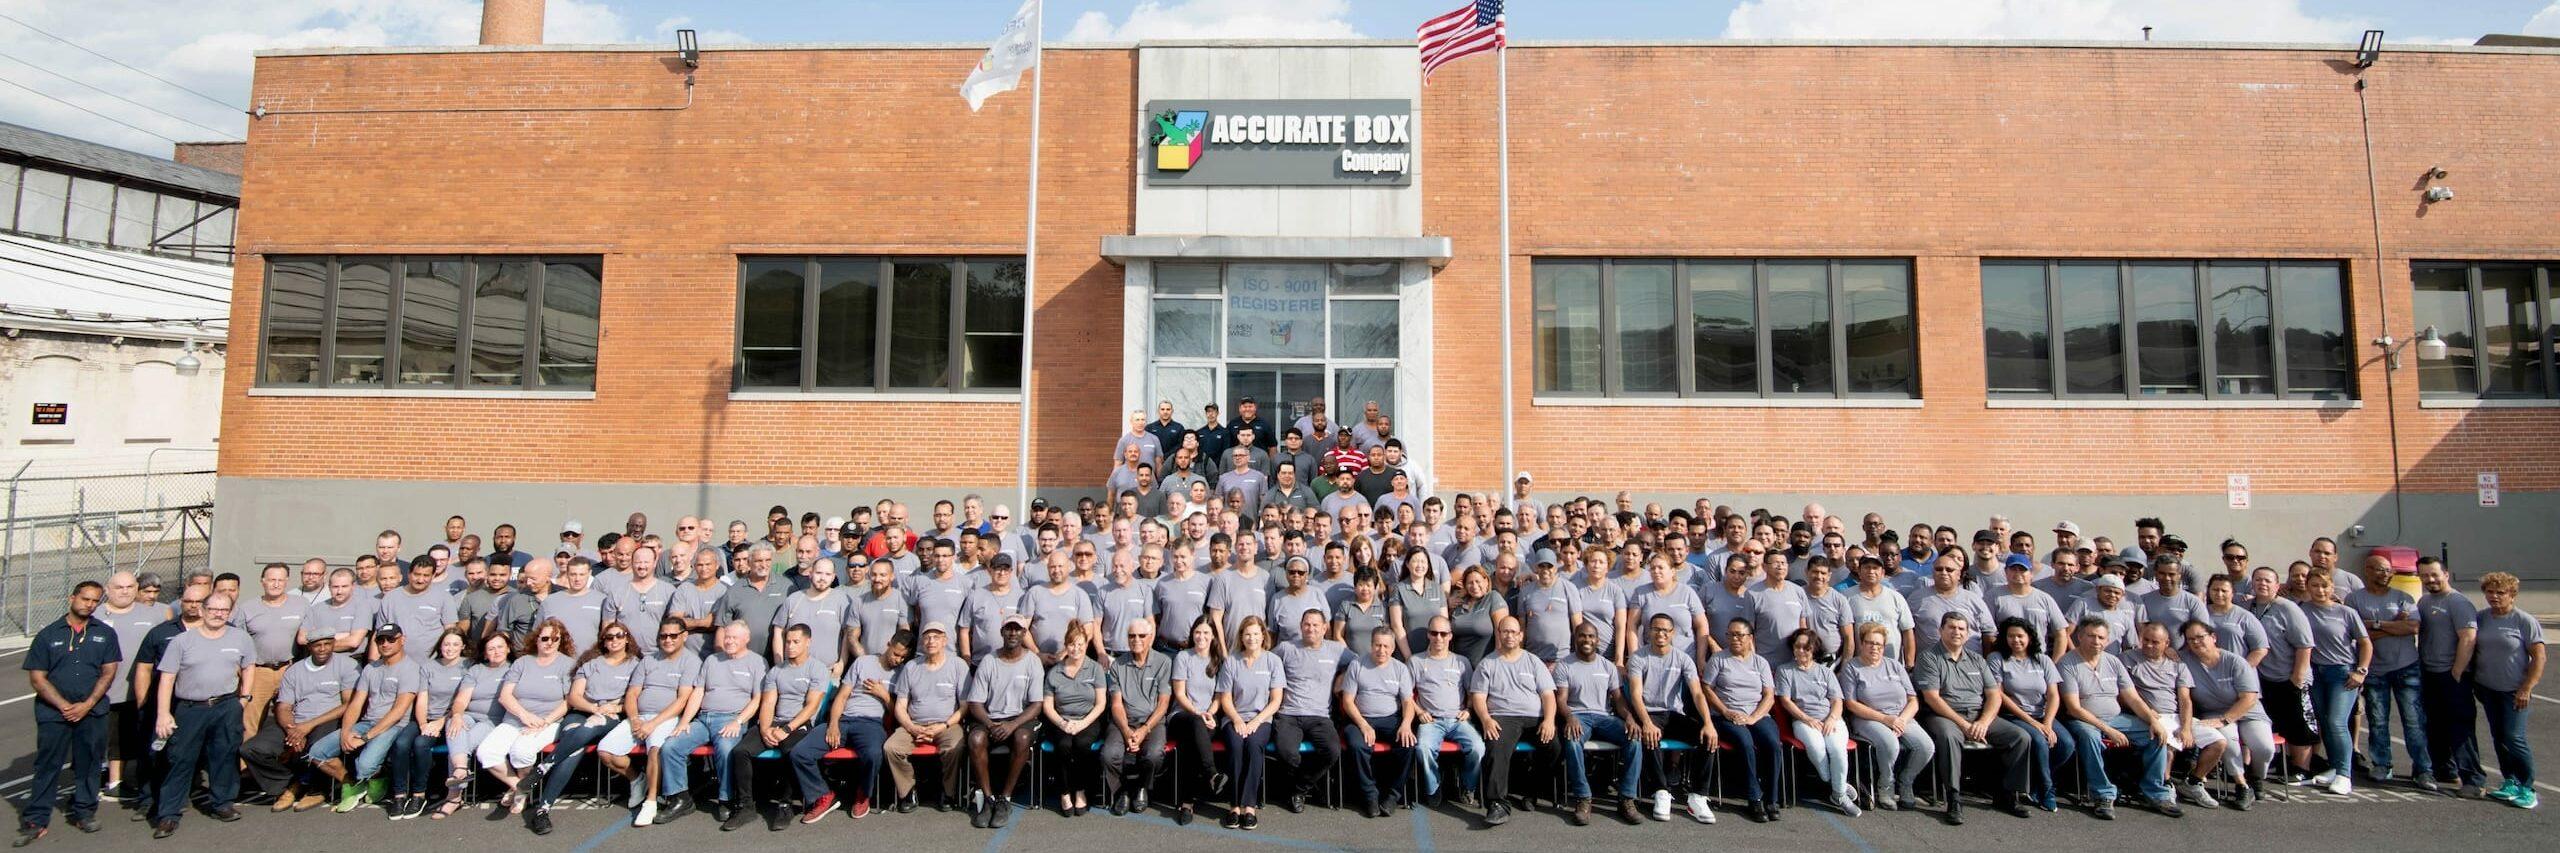 Accurate Box Company team photo in font to their office.